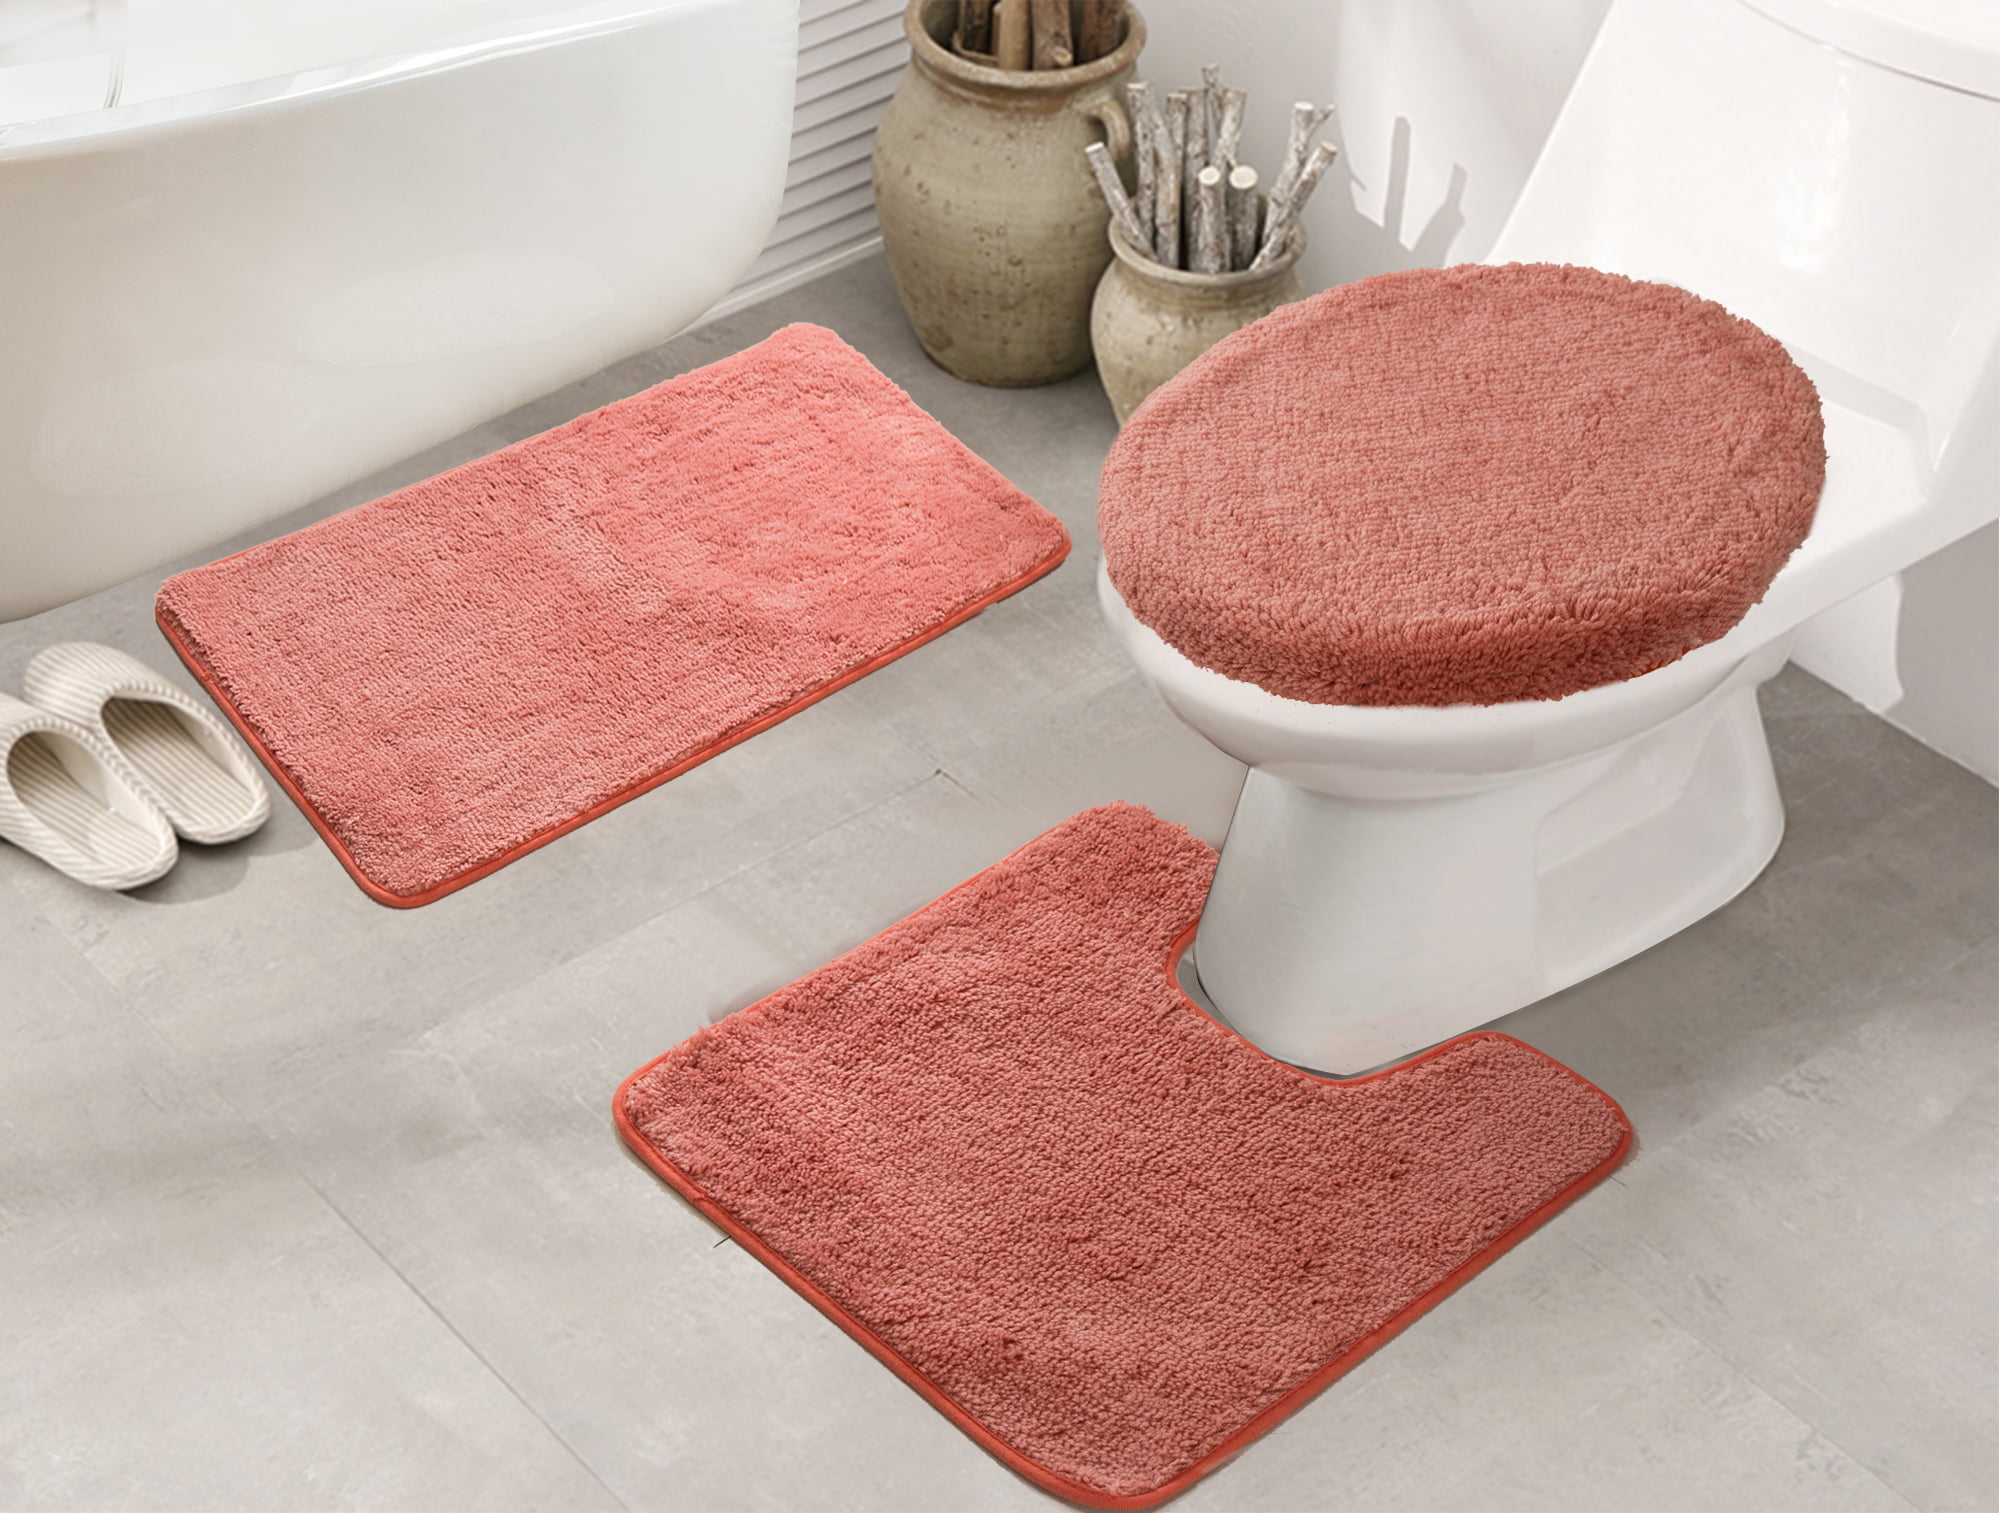 Perfact for Tub Shower Bath Room Home Decor 16 x 24 Inches PotteLove Japanese Maple 3 Piece Bathroom Rug Set Bath Mat Shower Rug U Shaped Contour Mat Lid Cover Non-Slip with Rubber Backing 